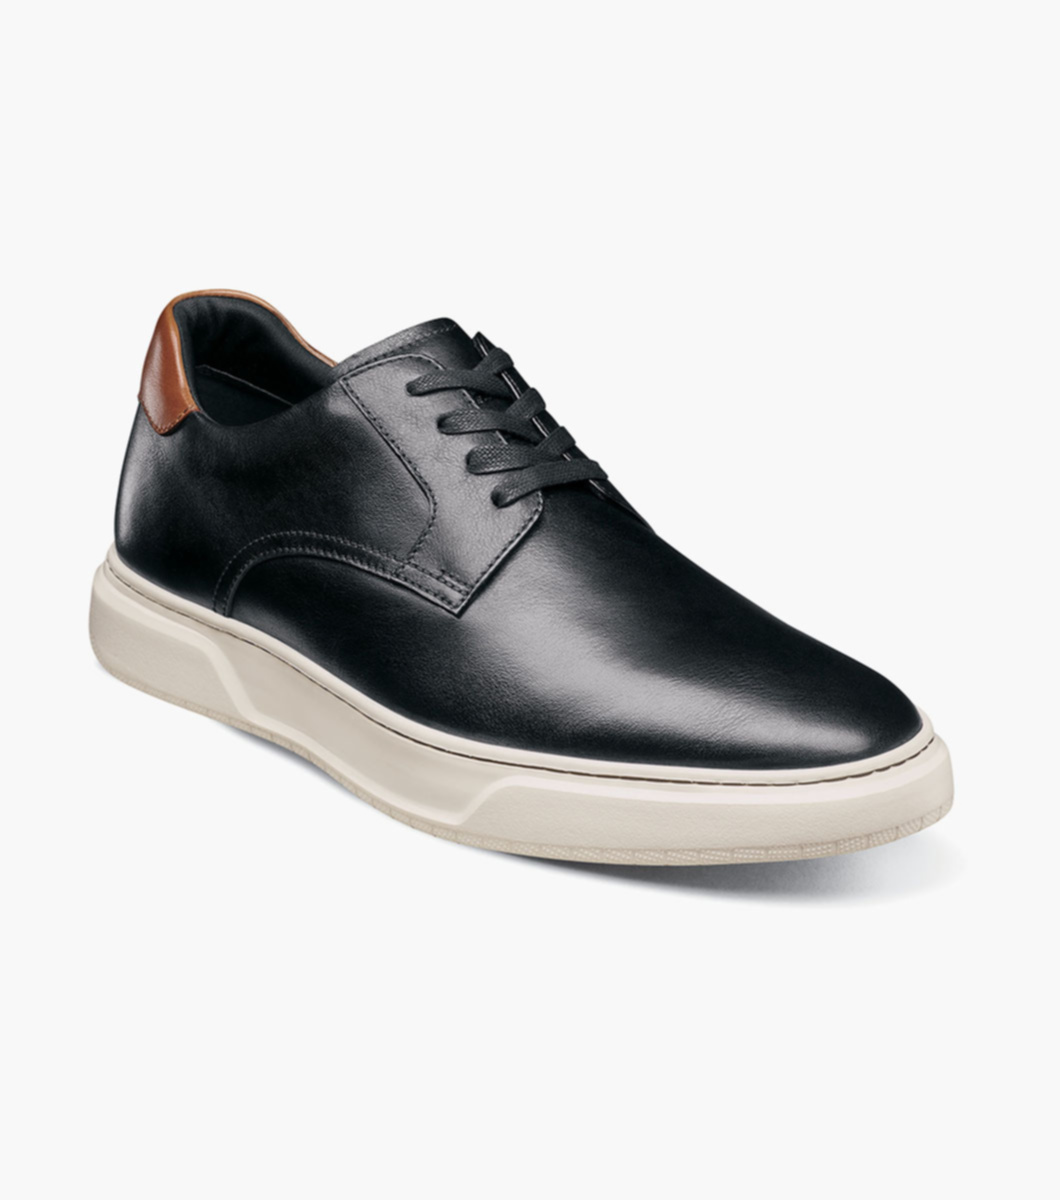 Men's Casual Shoes: Sneakers, Boots and more - Replay Official Store